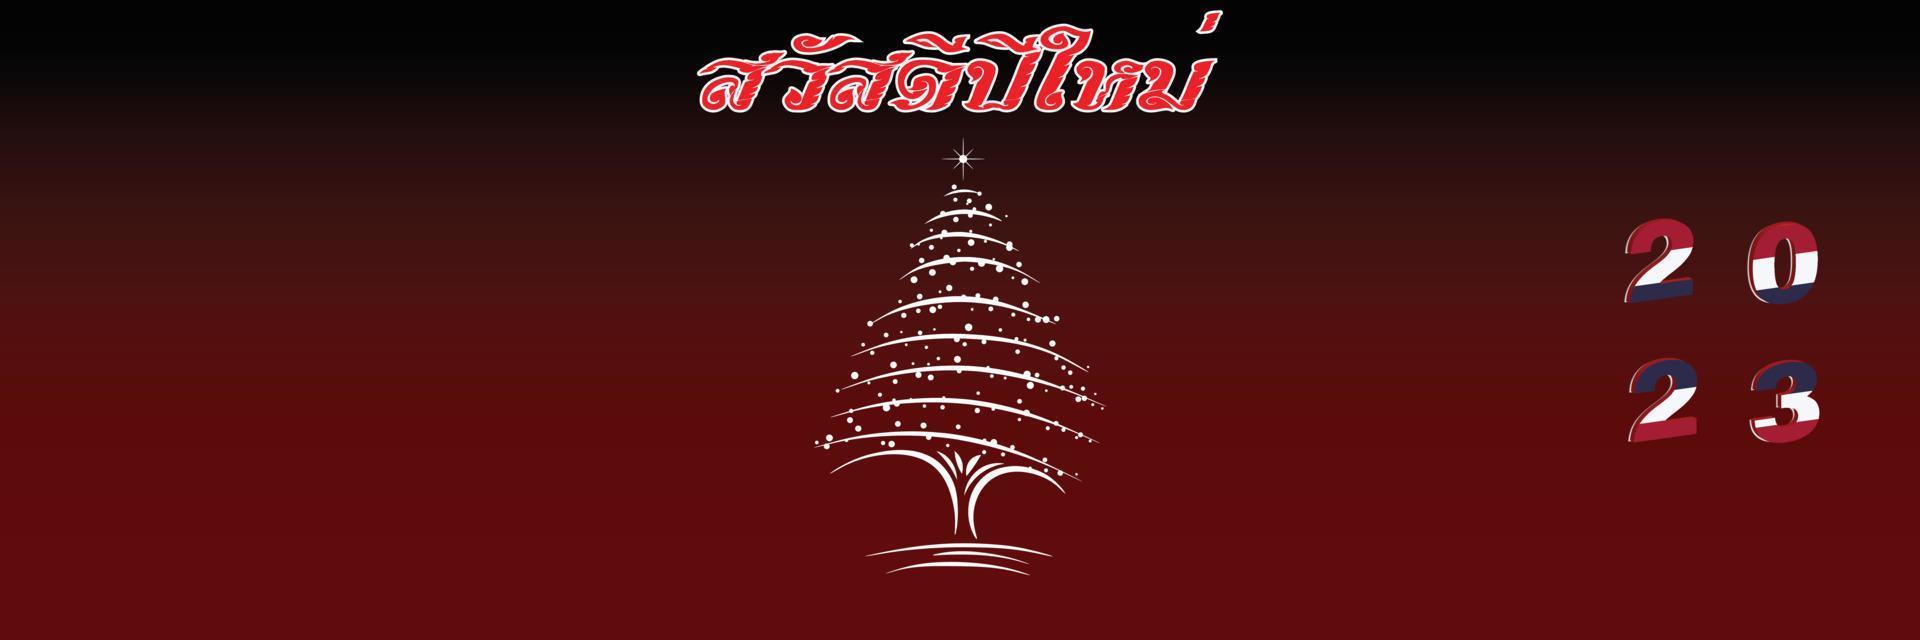 Merry Christmas and Happy New Year web page cover. Thailand flag on the year 2023. Holiday design for greeting card, banner, celebration poster, party invitation. Vector illustration.